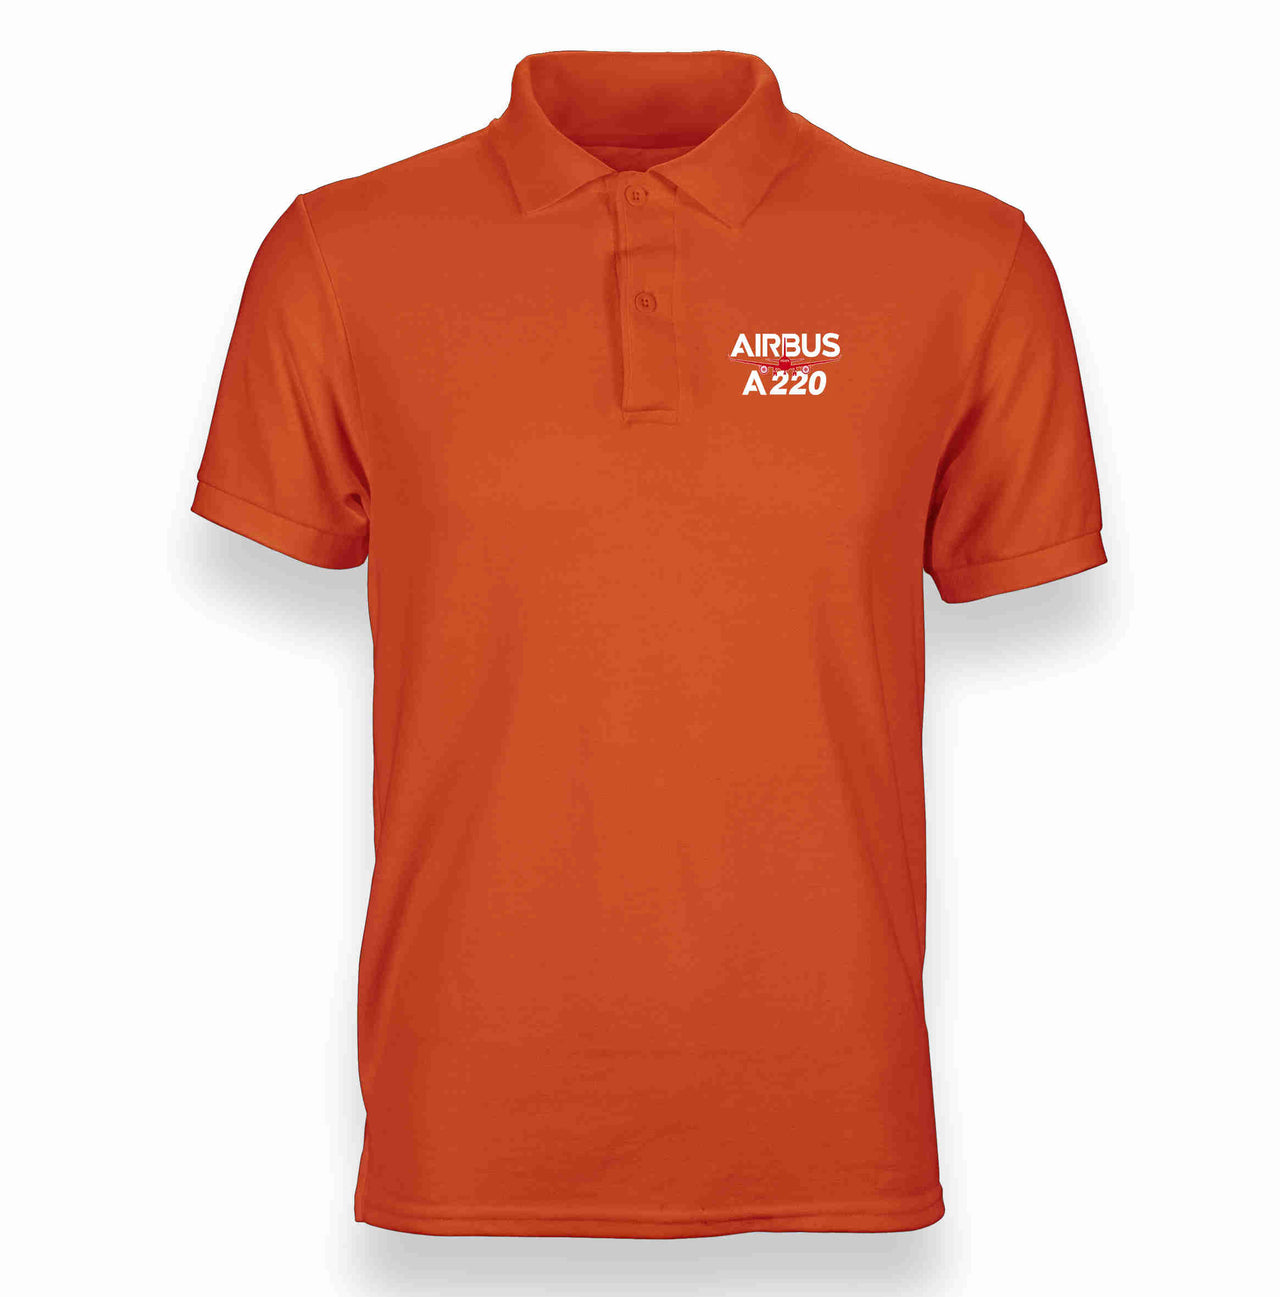 Amazing Airbus A220 Designed "WOMEN" Polo T-Shirts